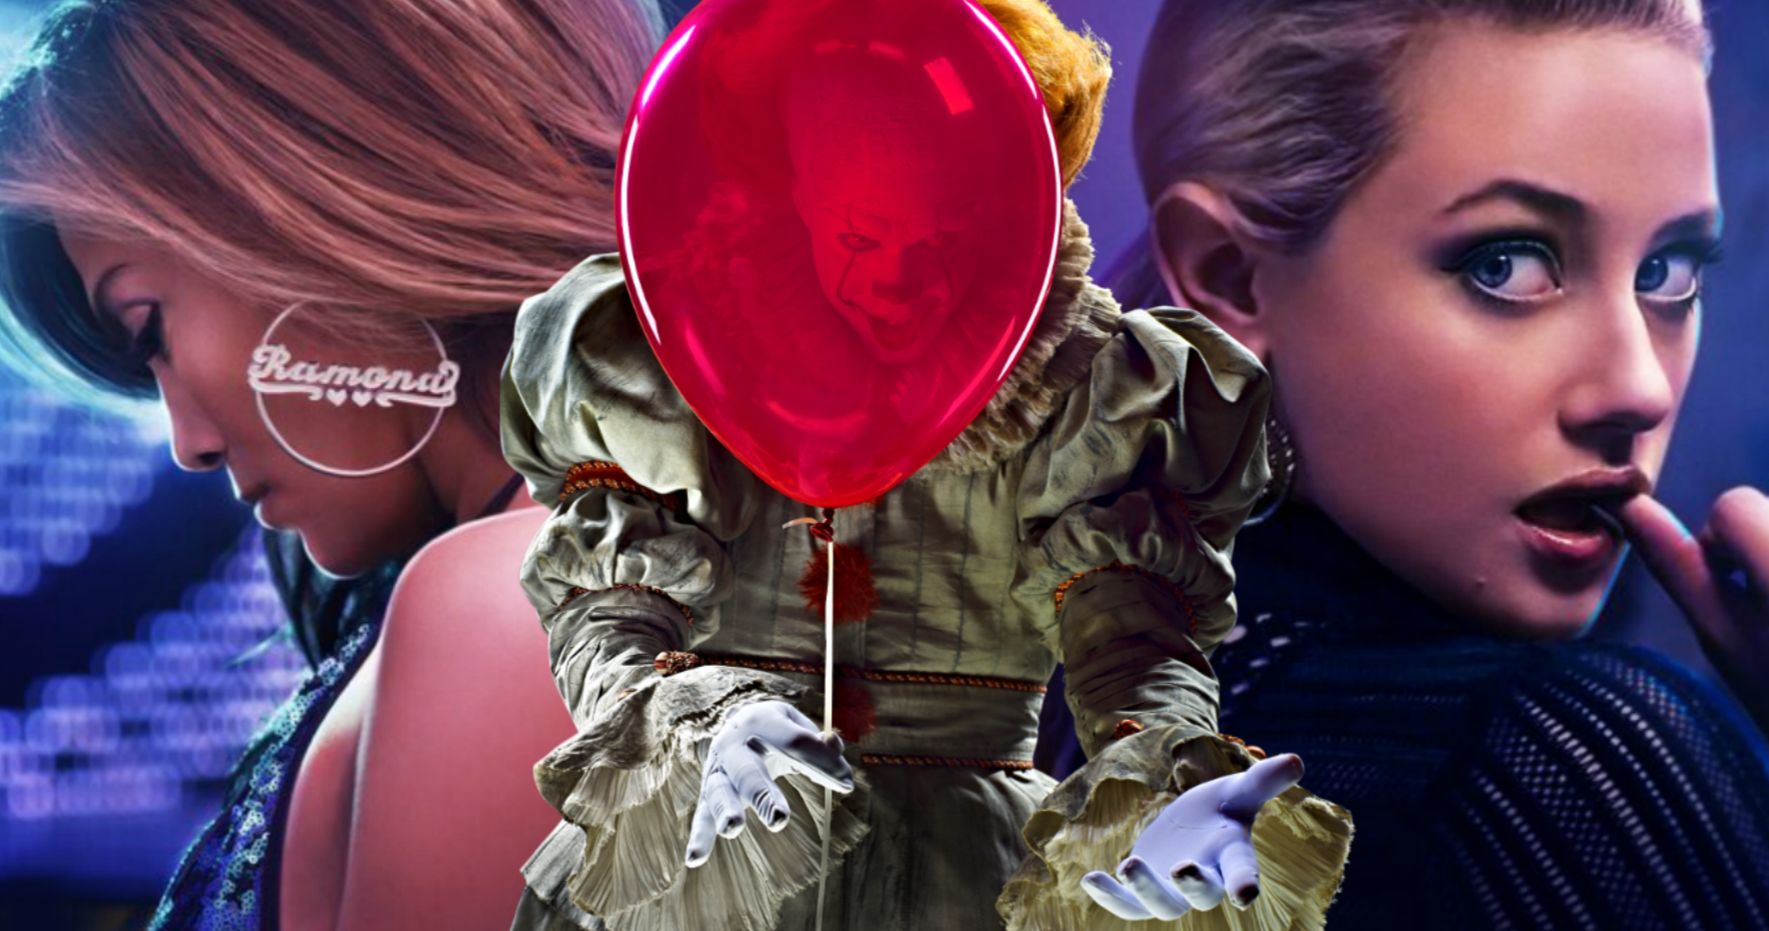 Will IT Chapter Two Scare Hustlers Away from the Top of the Box Office?